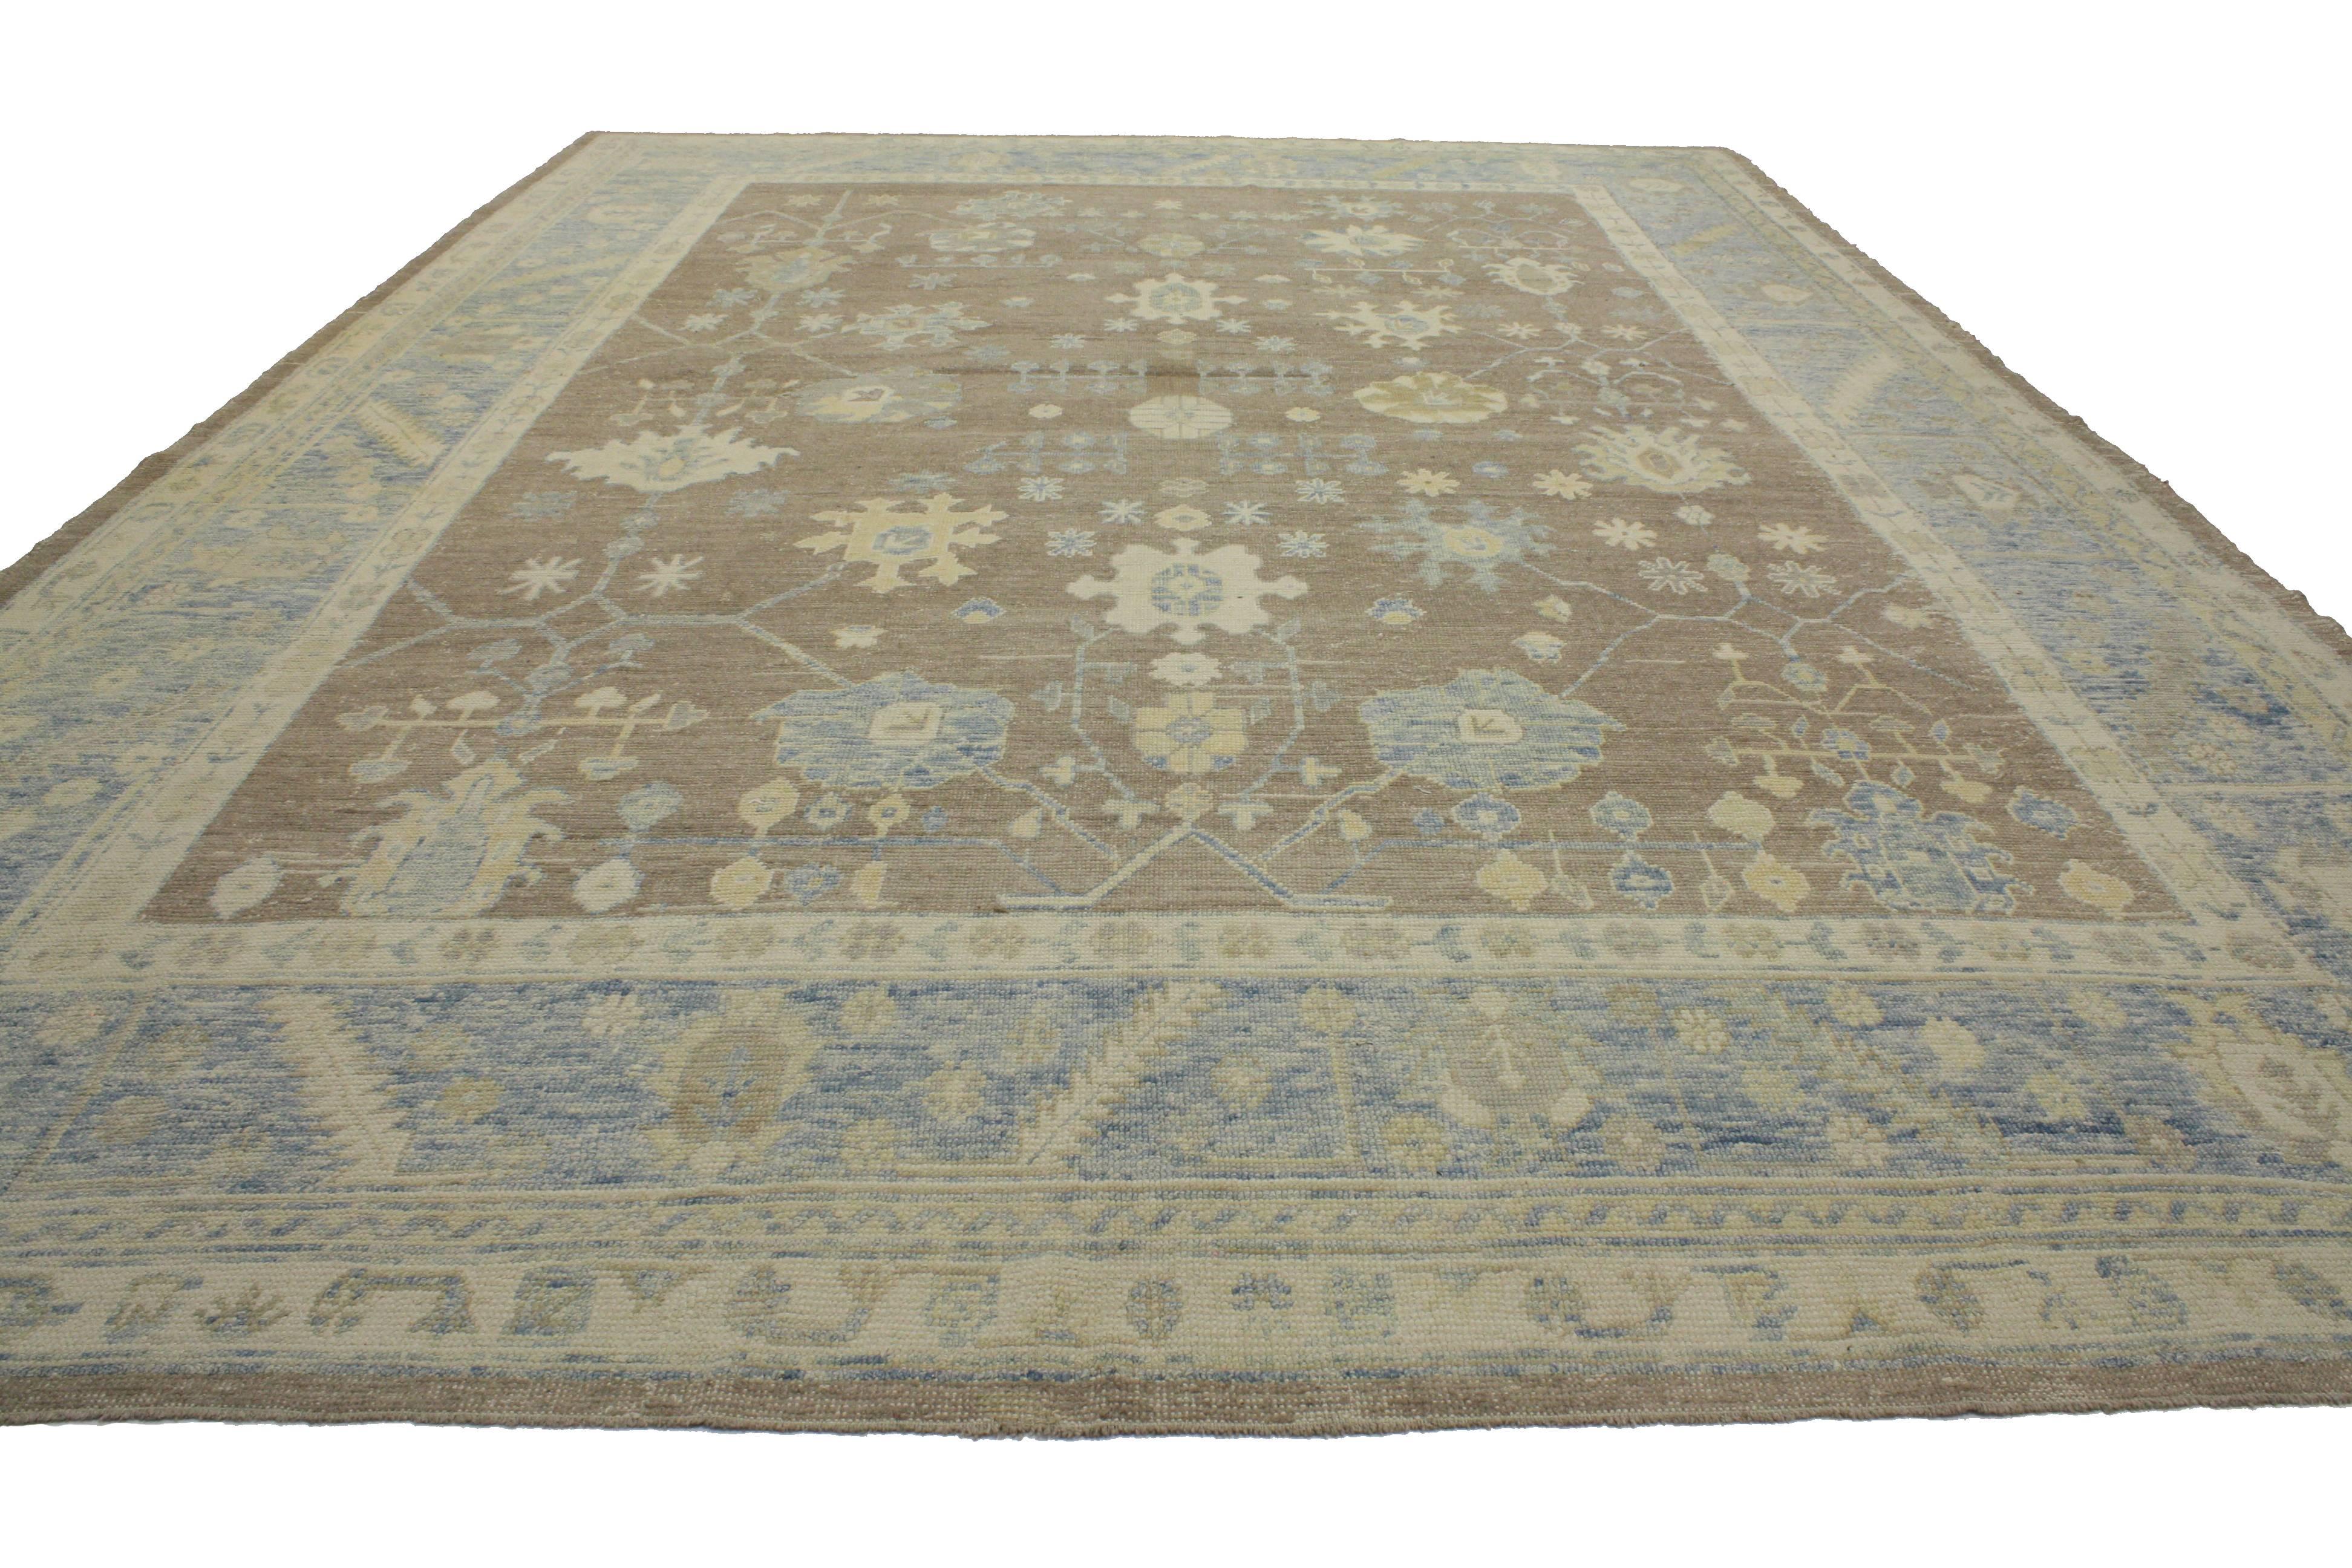 From fresh and formal to casual elegance, relish the refinement as this modern Turkish Oushak rug with transitional style in neutral colors evoke an air of warmth and comfort with its timeless aesthetic. Rendered in an earth-tone color palette of